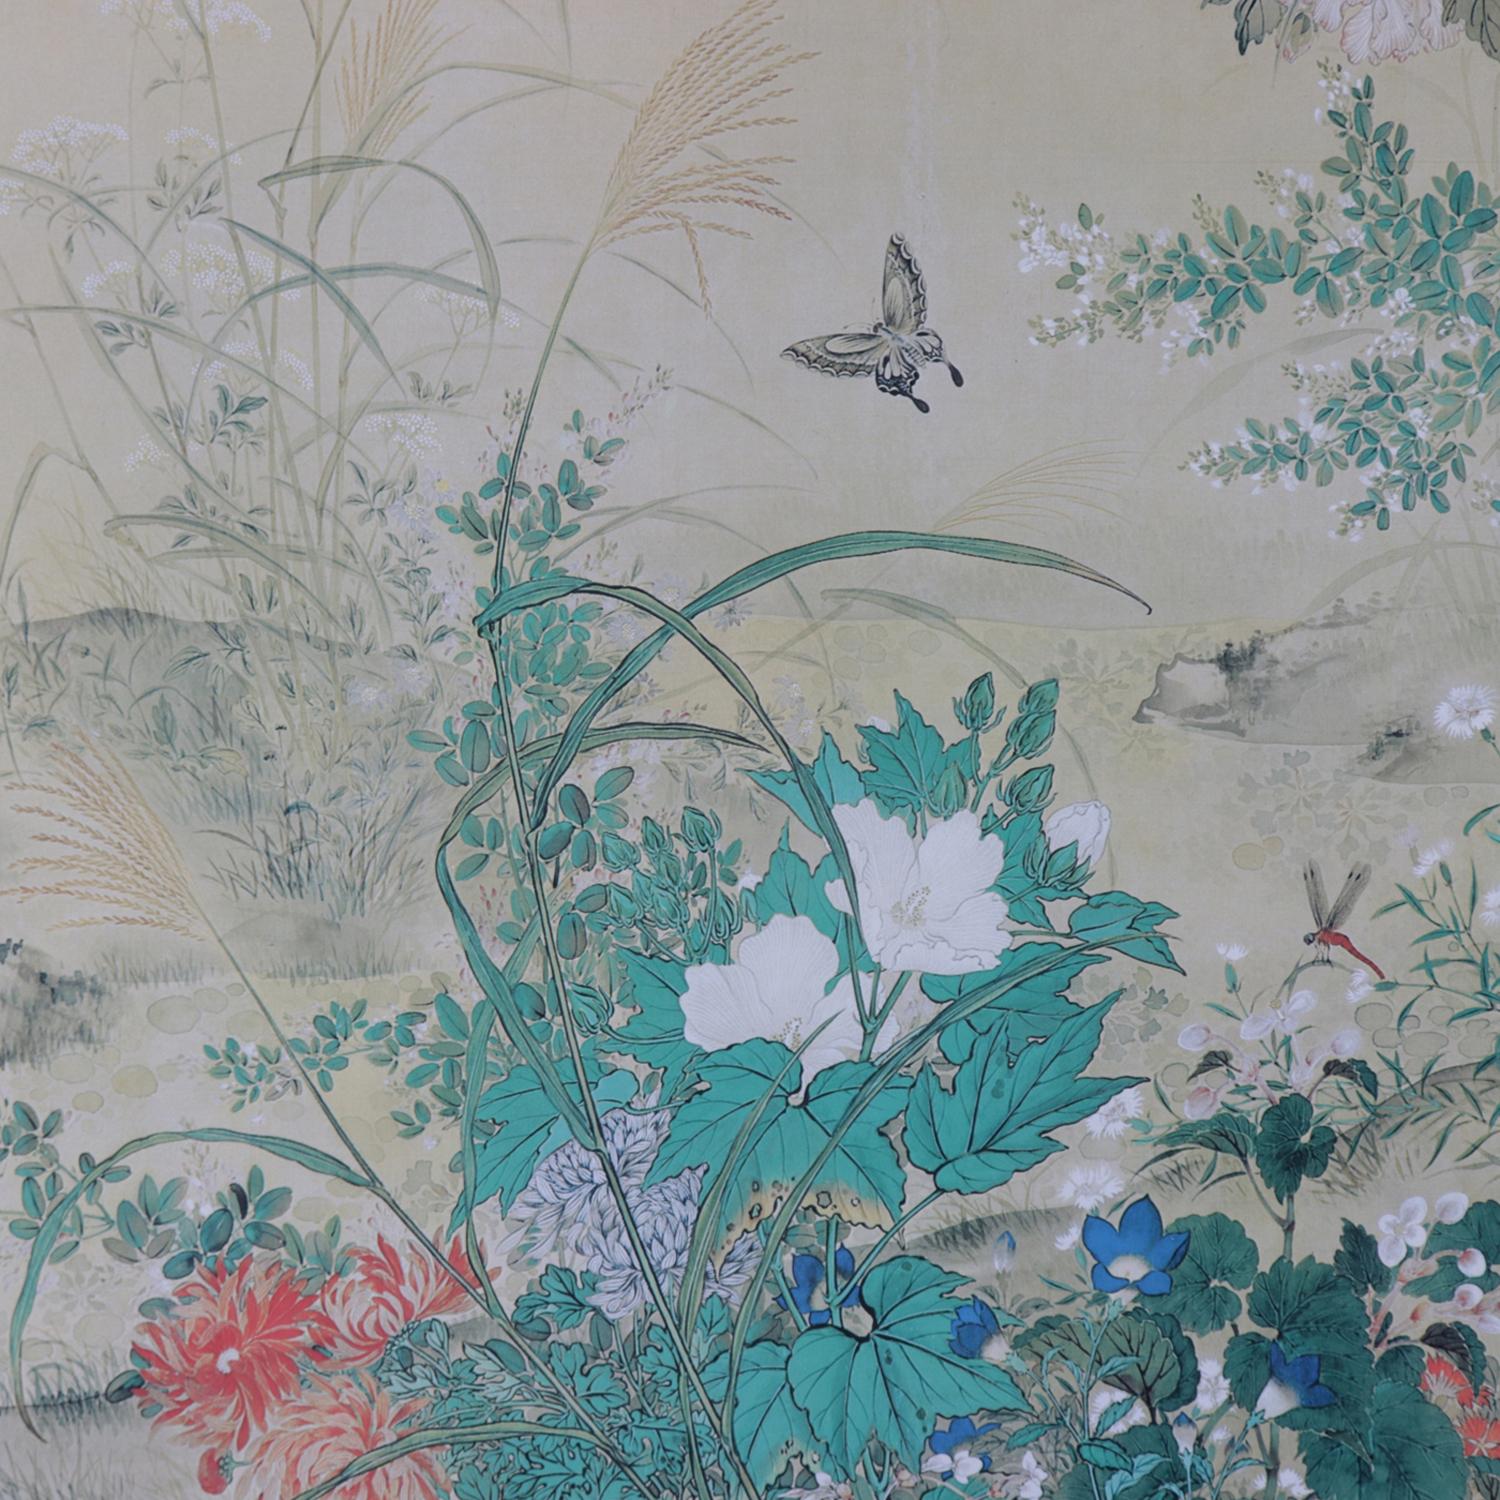 Chinese Vintage Asian Woodblock Print of Garden with Birds, Chop Mark Signed, circa 1940